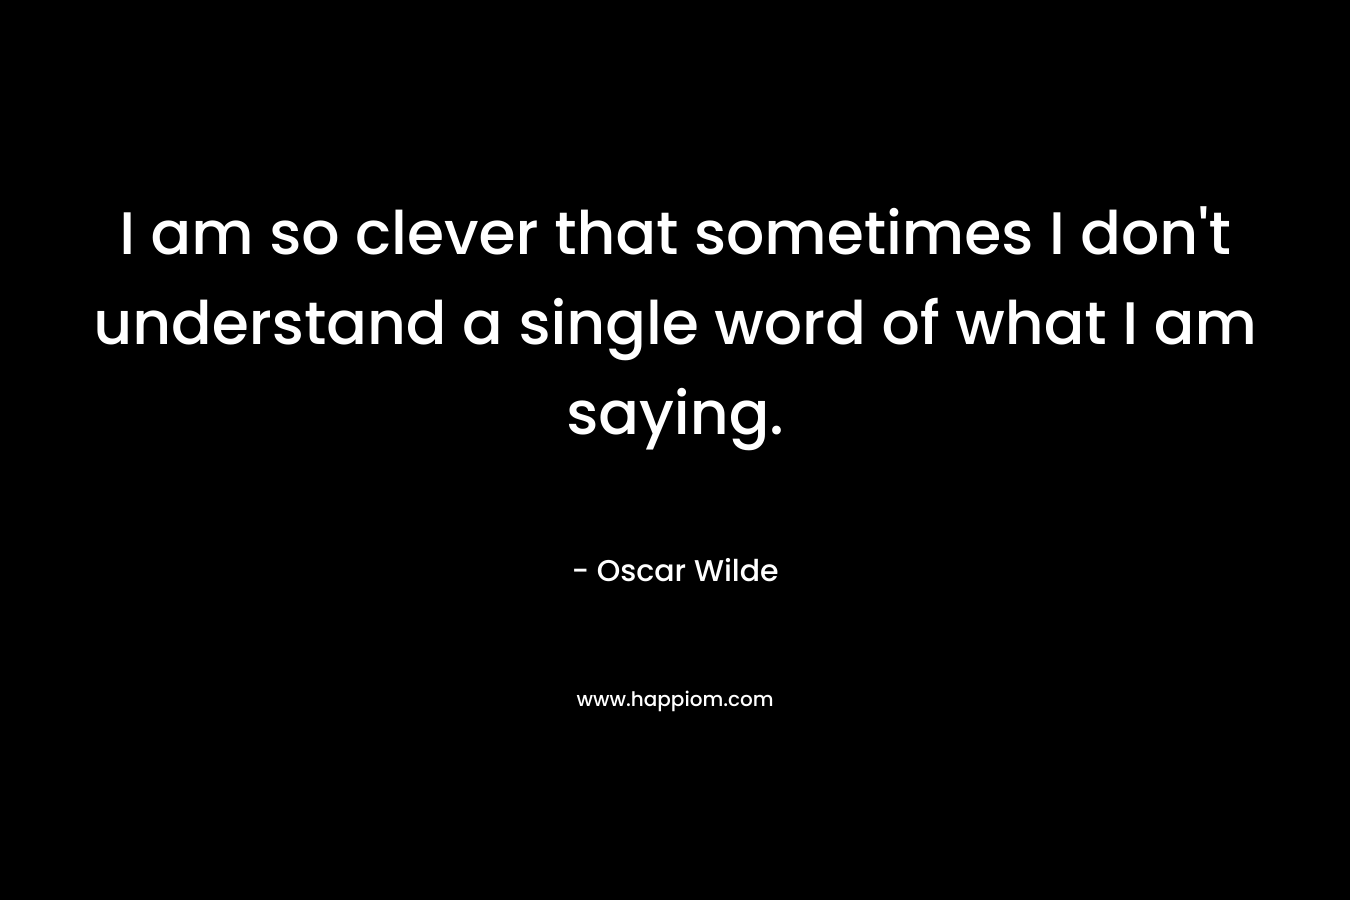 I am so clever that sometimes I don't understand a single word of what I am saying.